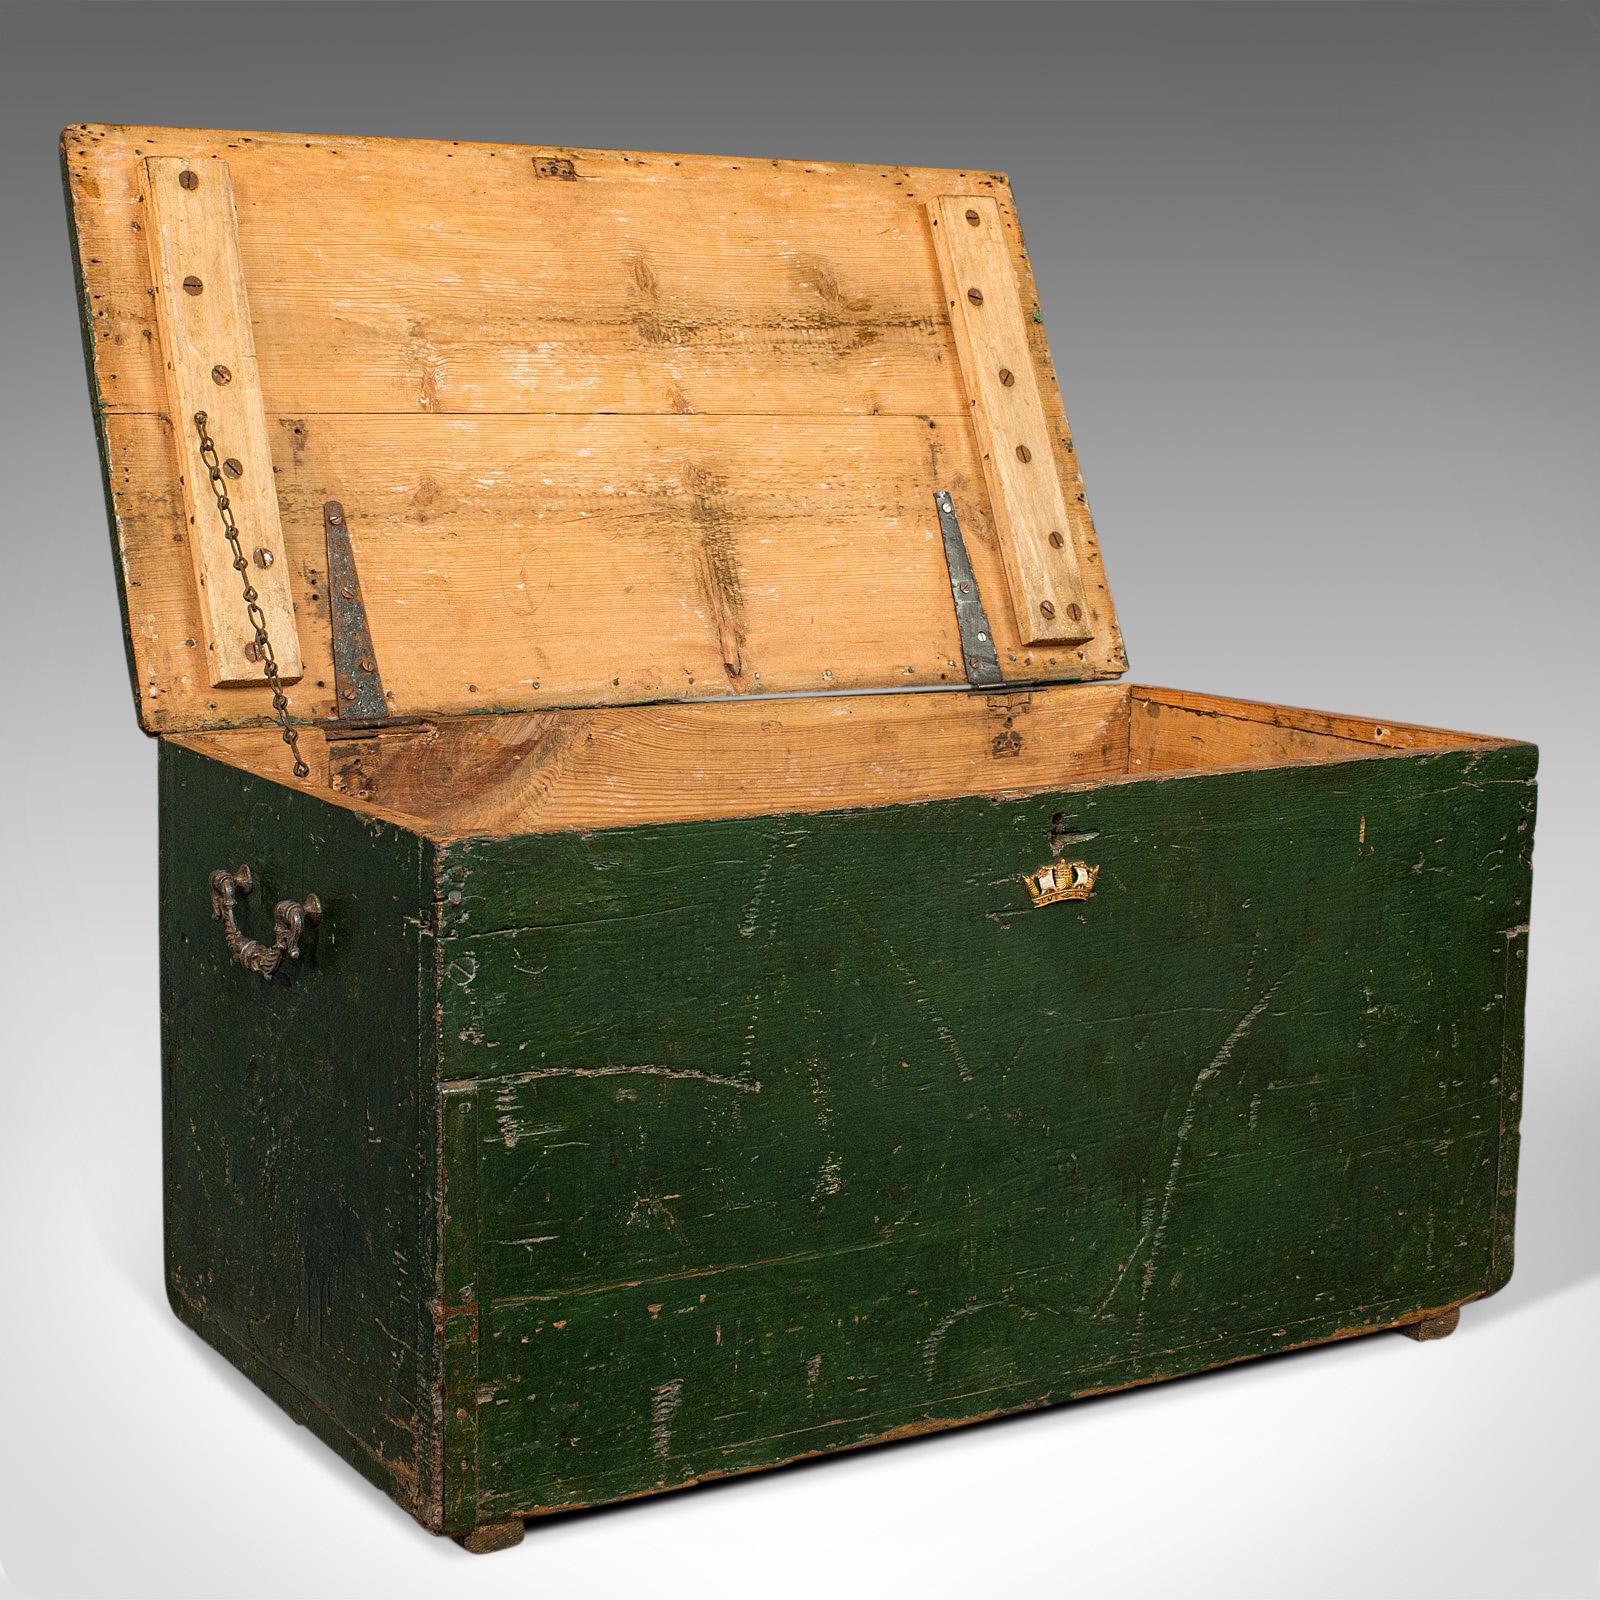 This is an antique mail trunk. An English, pine steamer carriage chest dating to the Edwardian period, circa 1905.

Rich tones with original appeal
Displays a desirable aged patina
Original painted pine in attractive Oxford Green
Naked pine